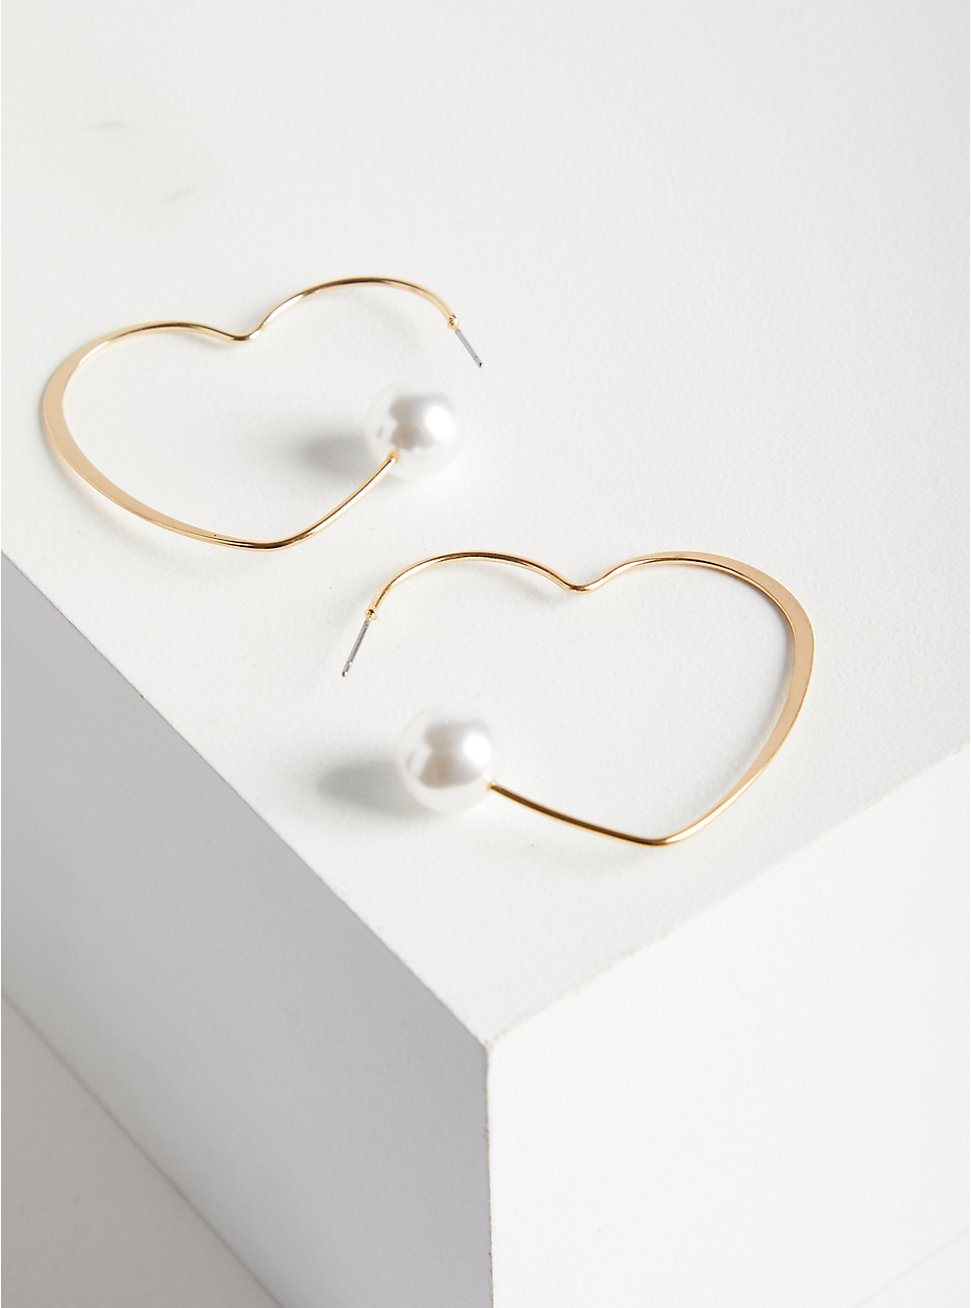 Plus Size Wire Hoop Hearts with Pearl - Gold Tone, , hi-res